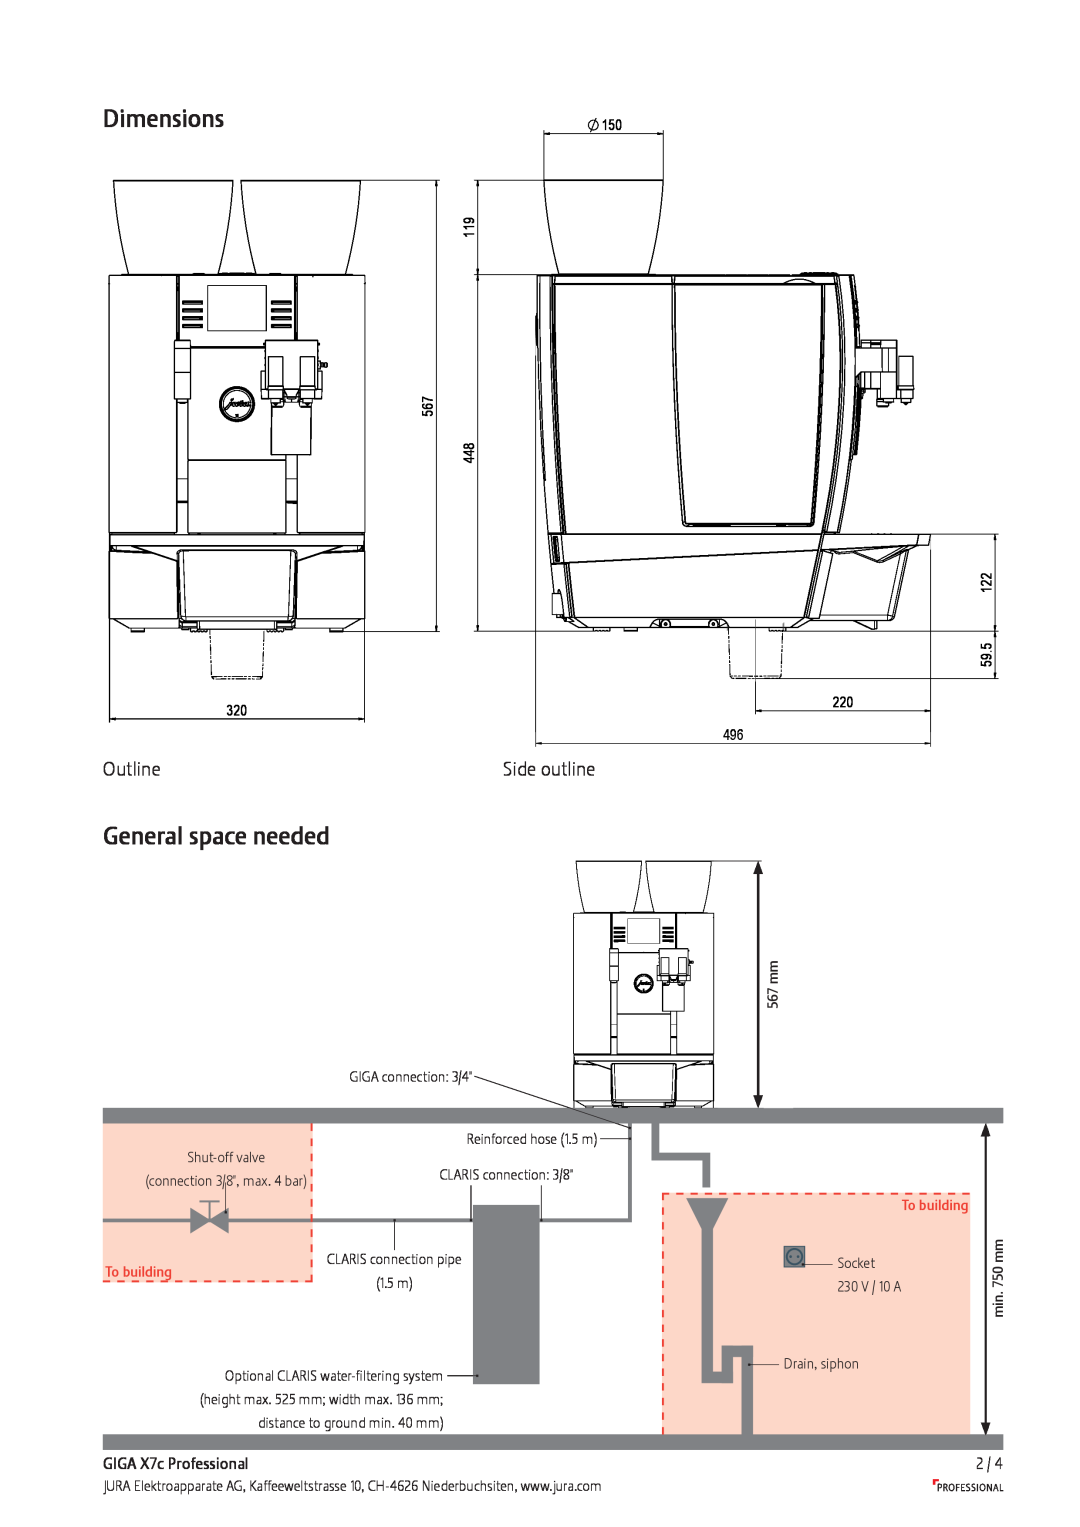 Jura Capresso manual Dimensions, General space needed, Side outline, GIGA X7c Professional, To building 